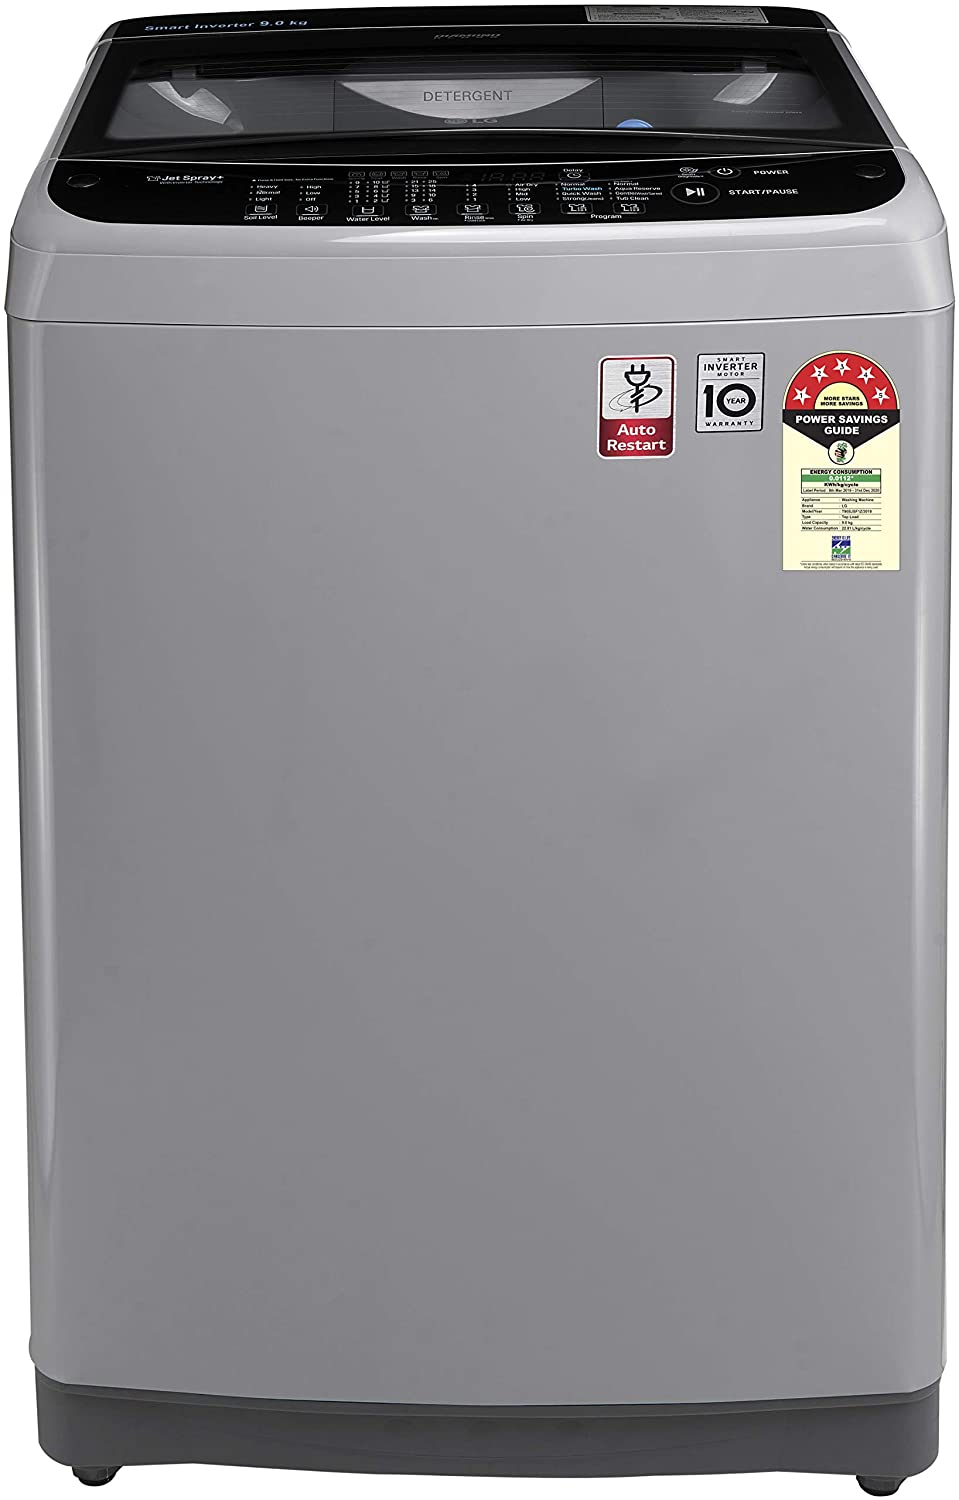 Best fully automatic top loading washing machine in India